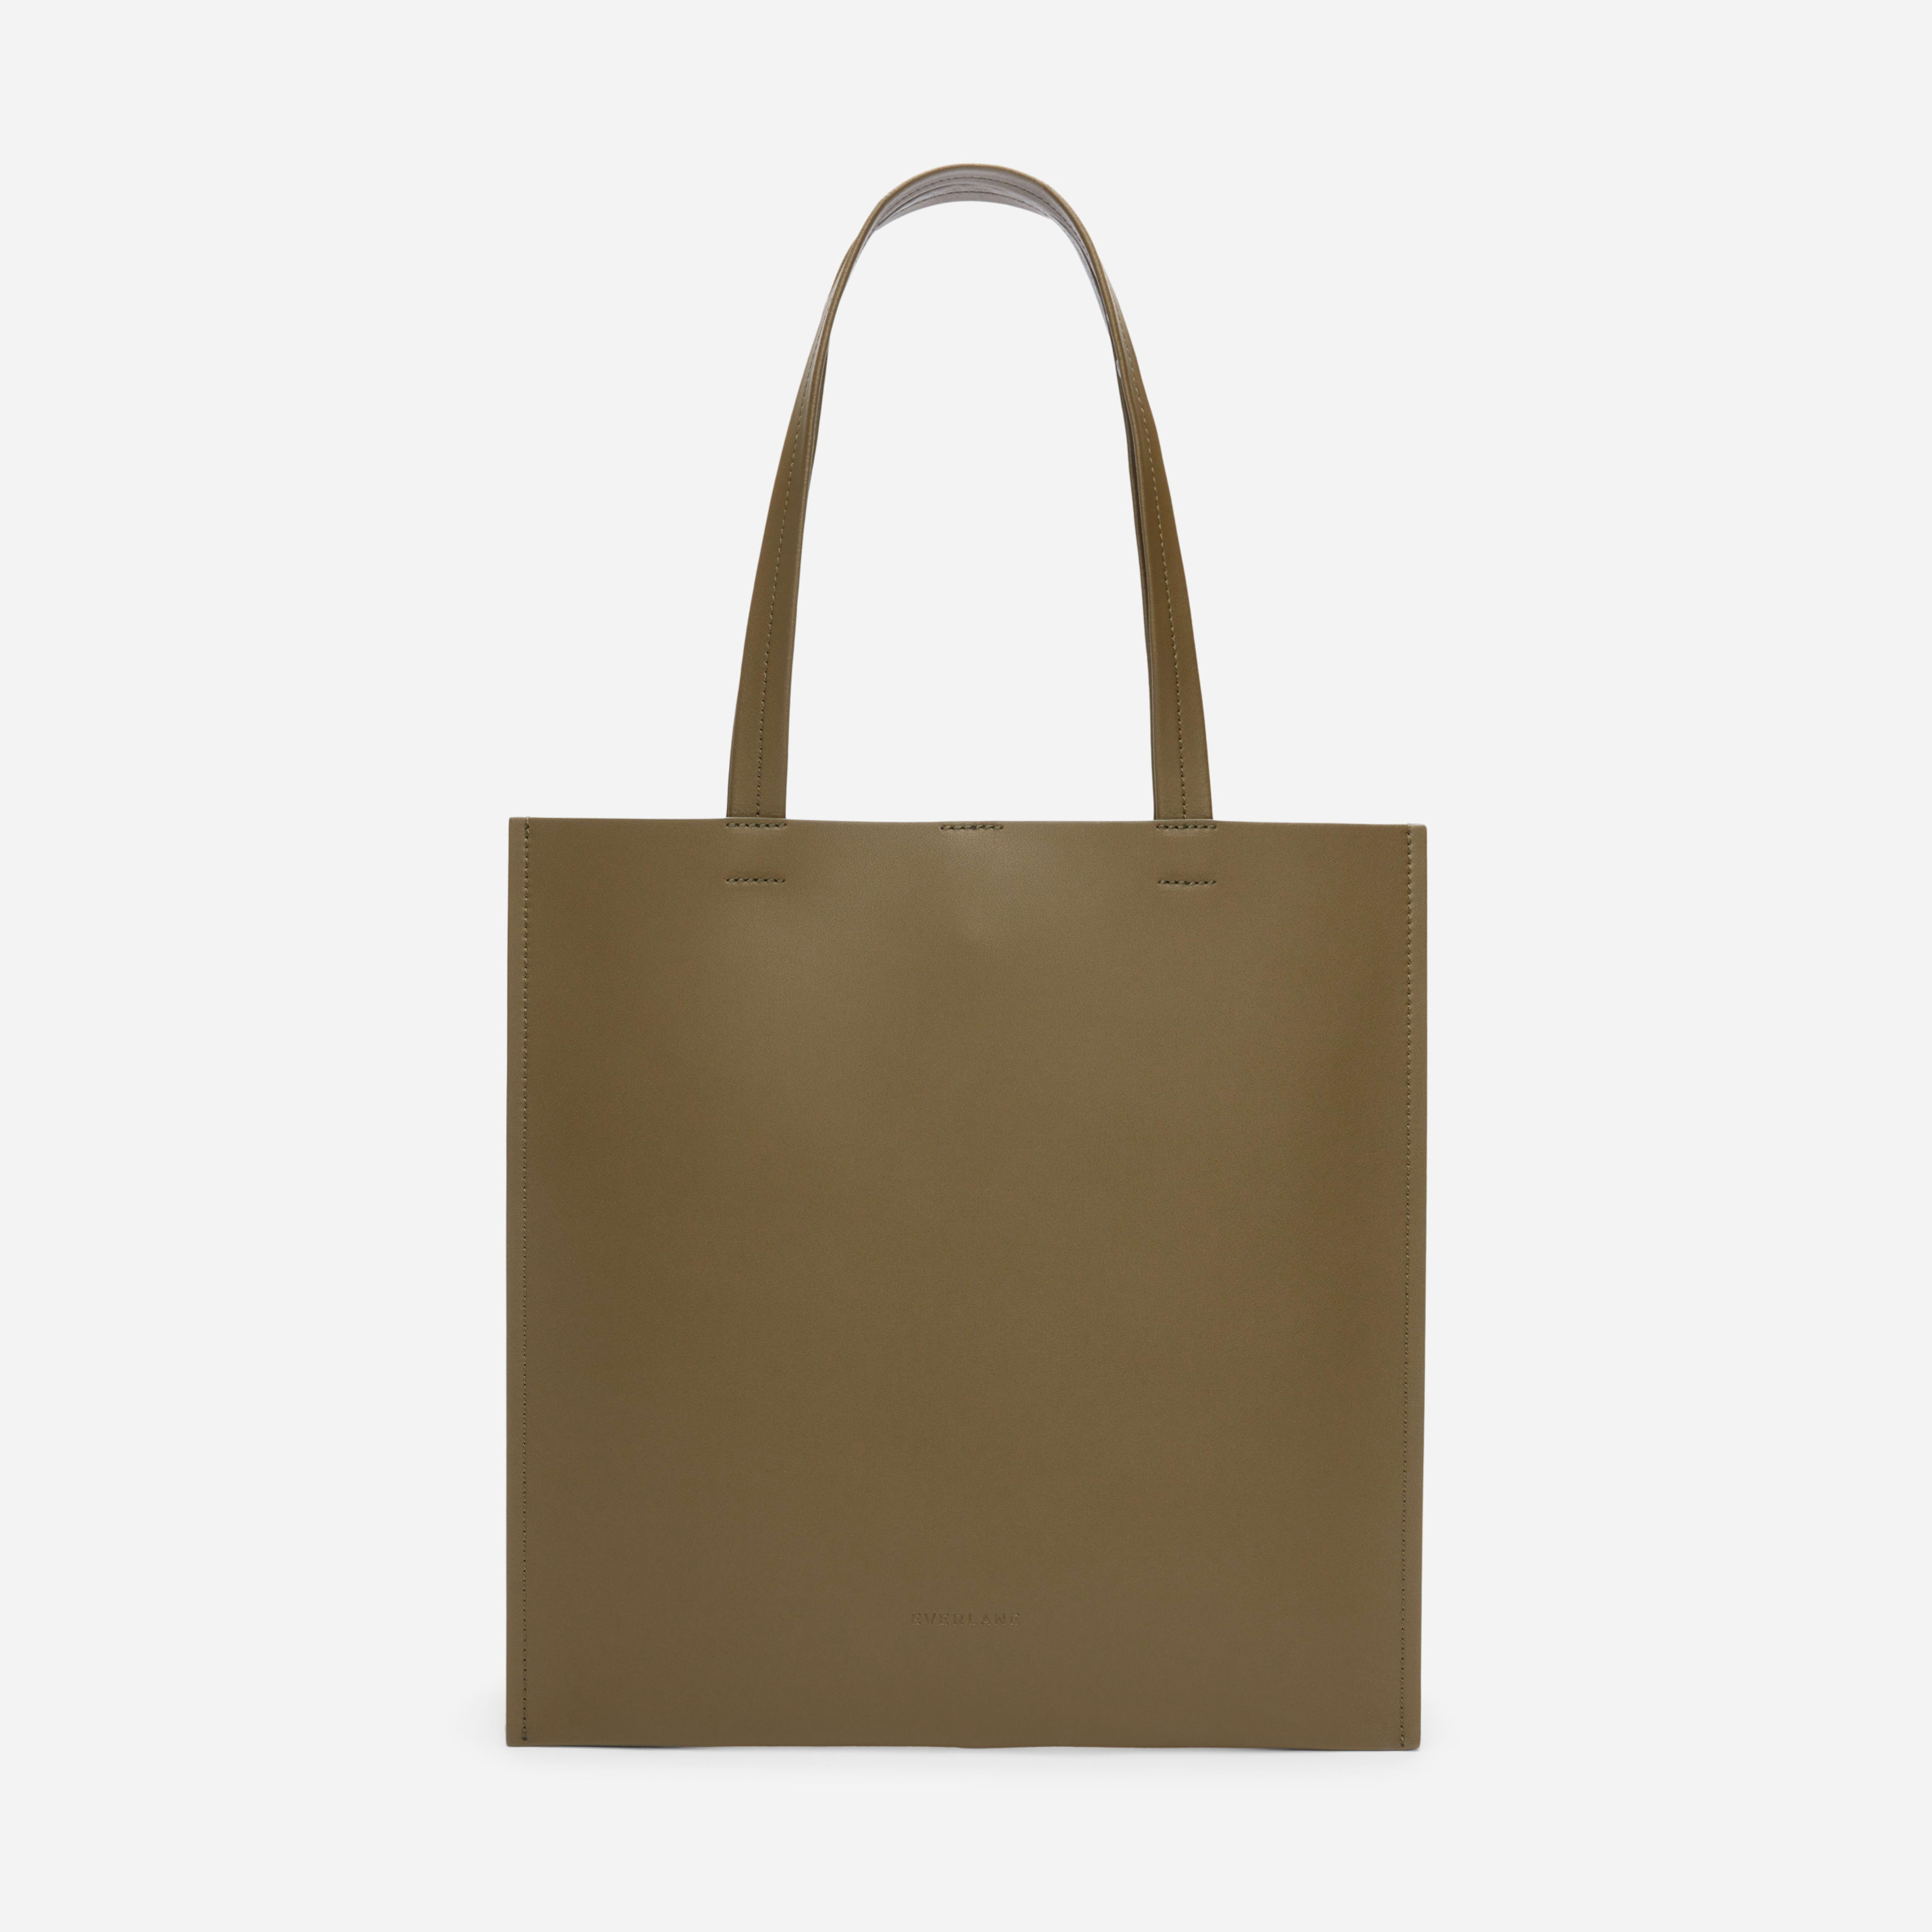 Women's Gallery Tote Bag by Everlane in Olive